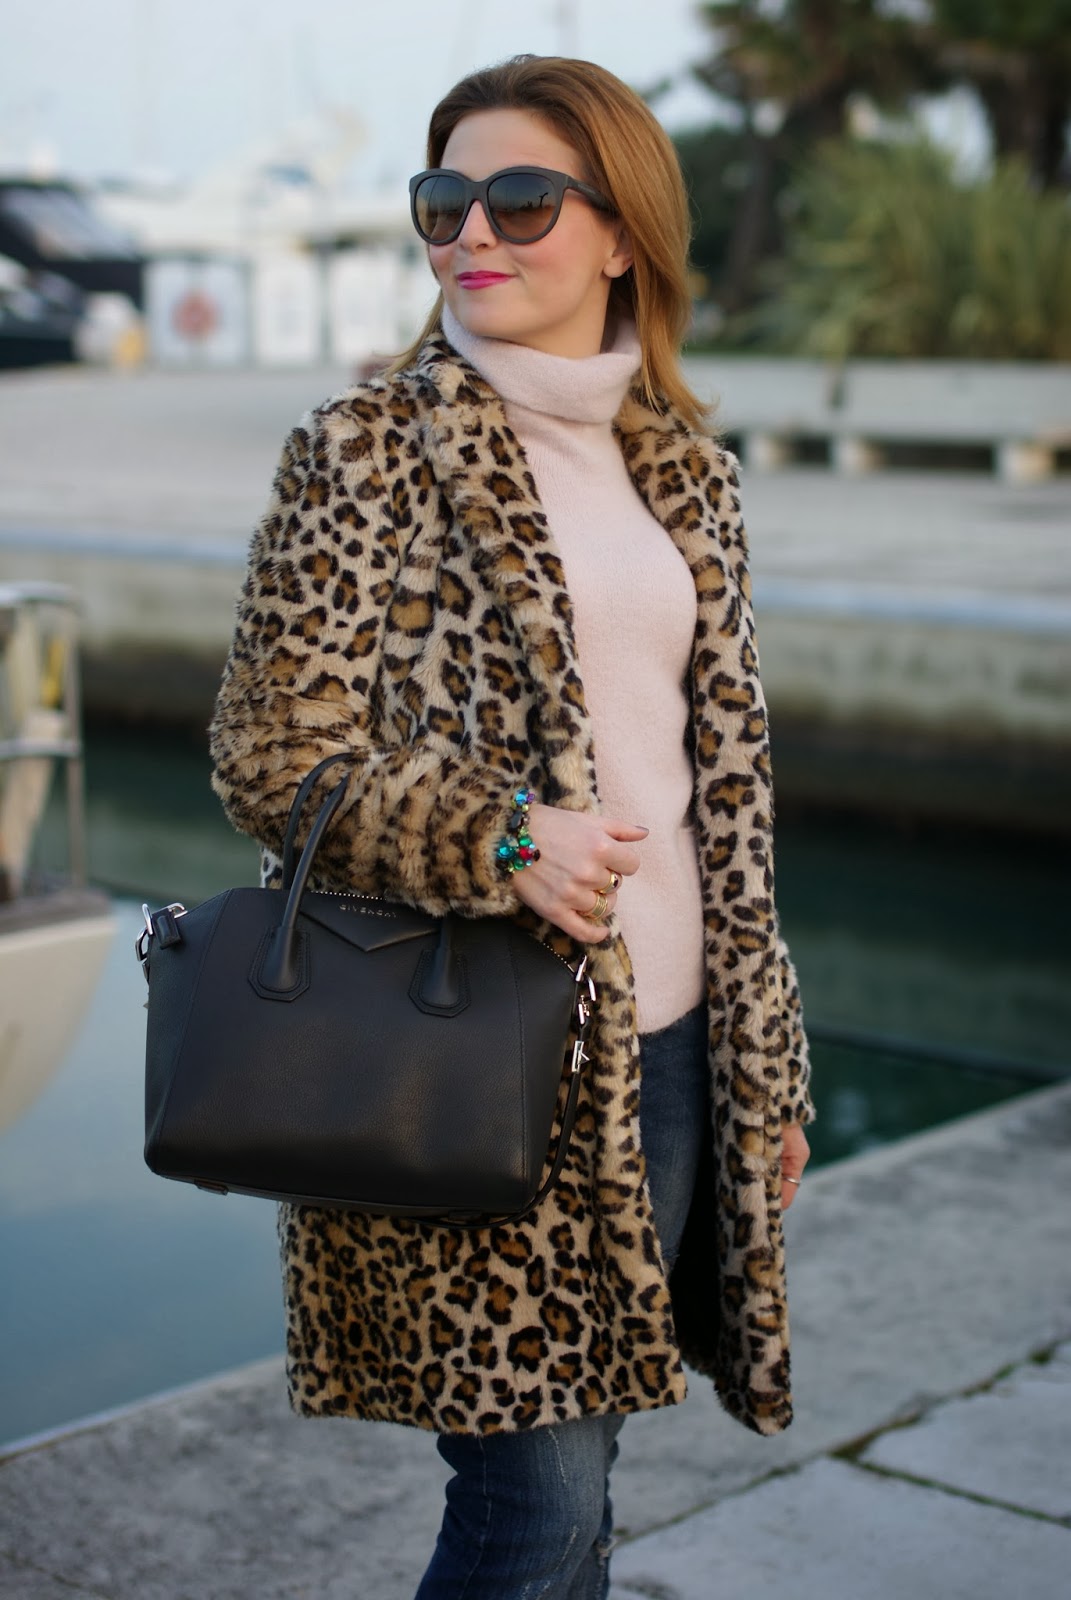 Leopard faux fur coat | Fashion and Cookies - fashion and beauty blog